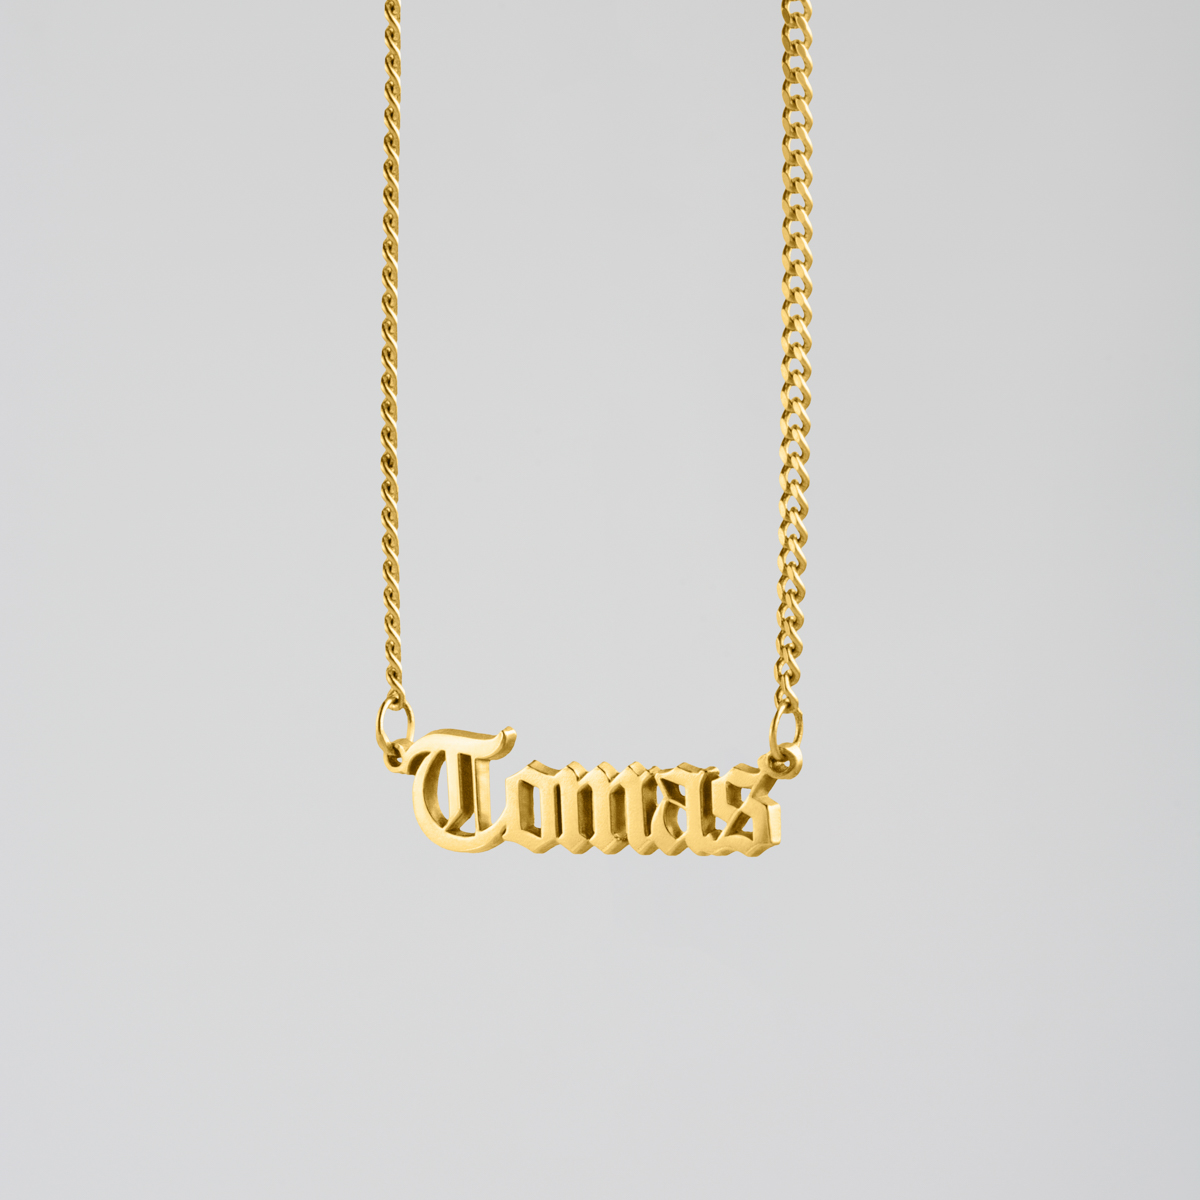 Tiny Gothic Name Necklace Gold Plated